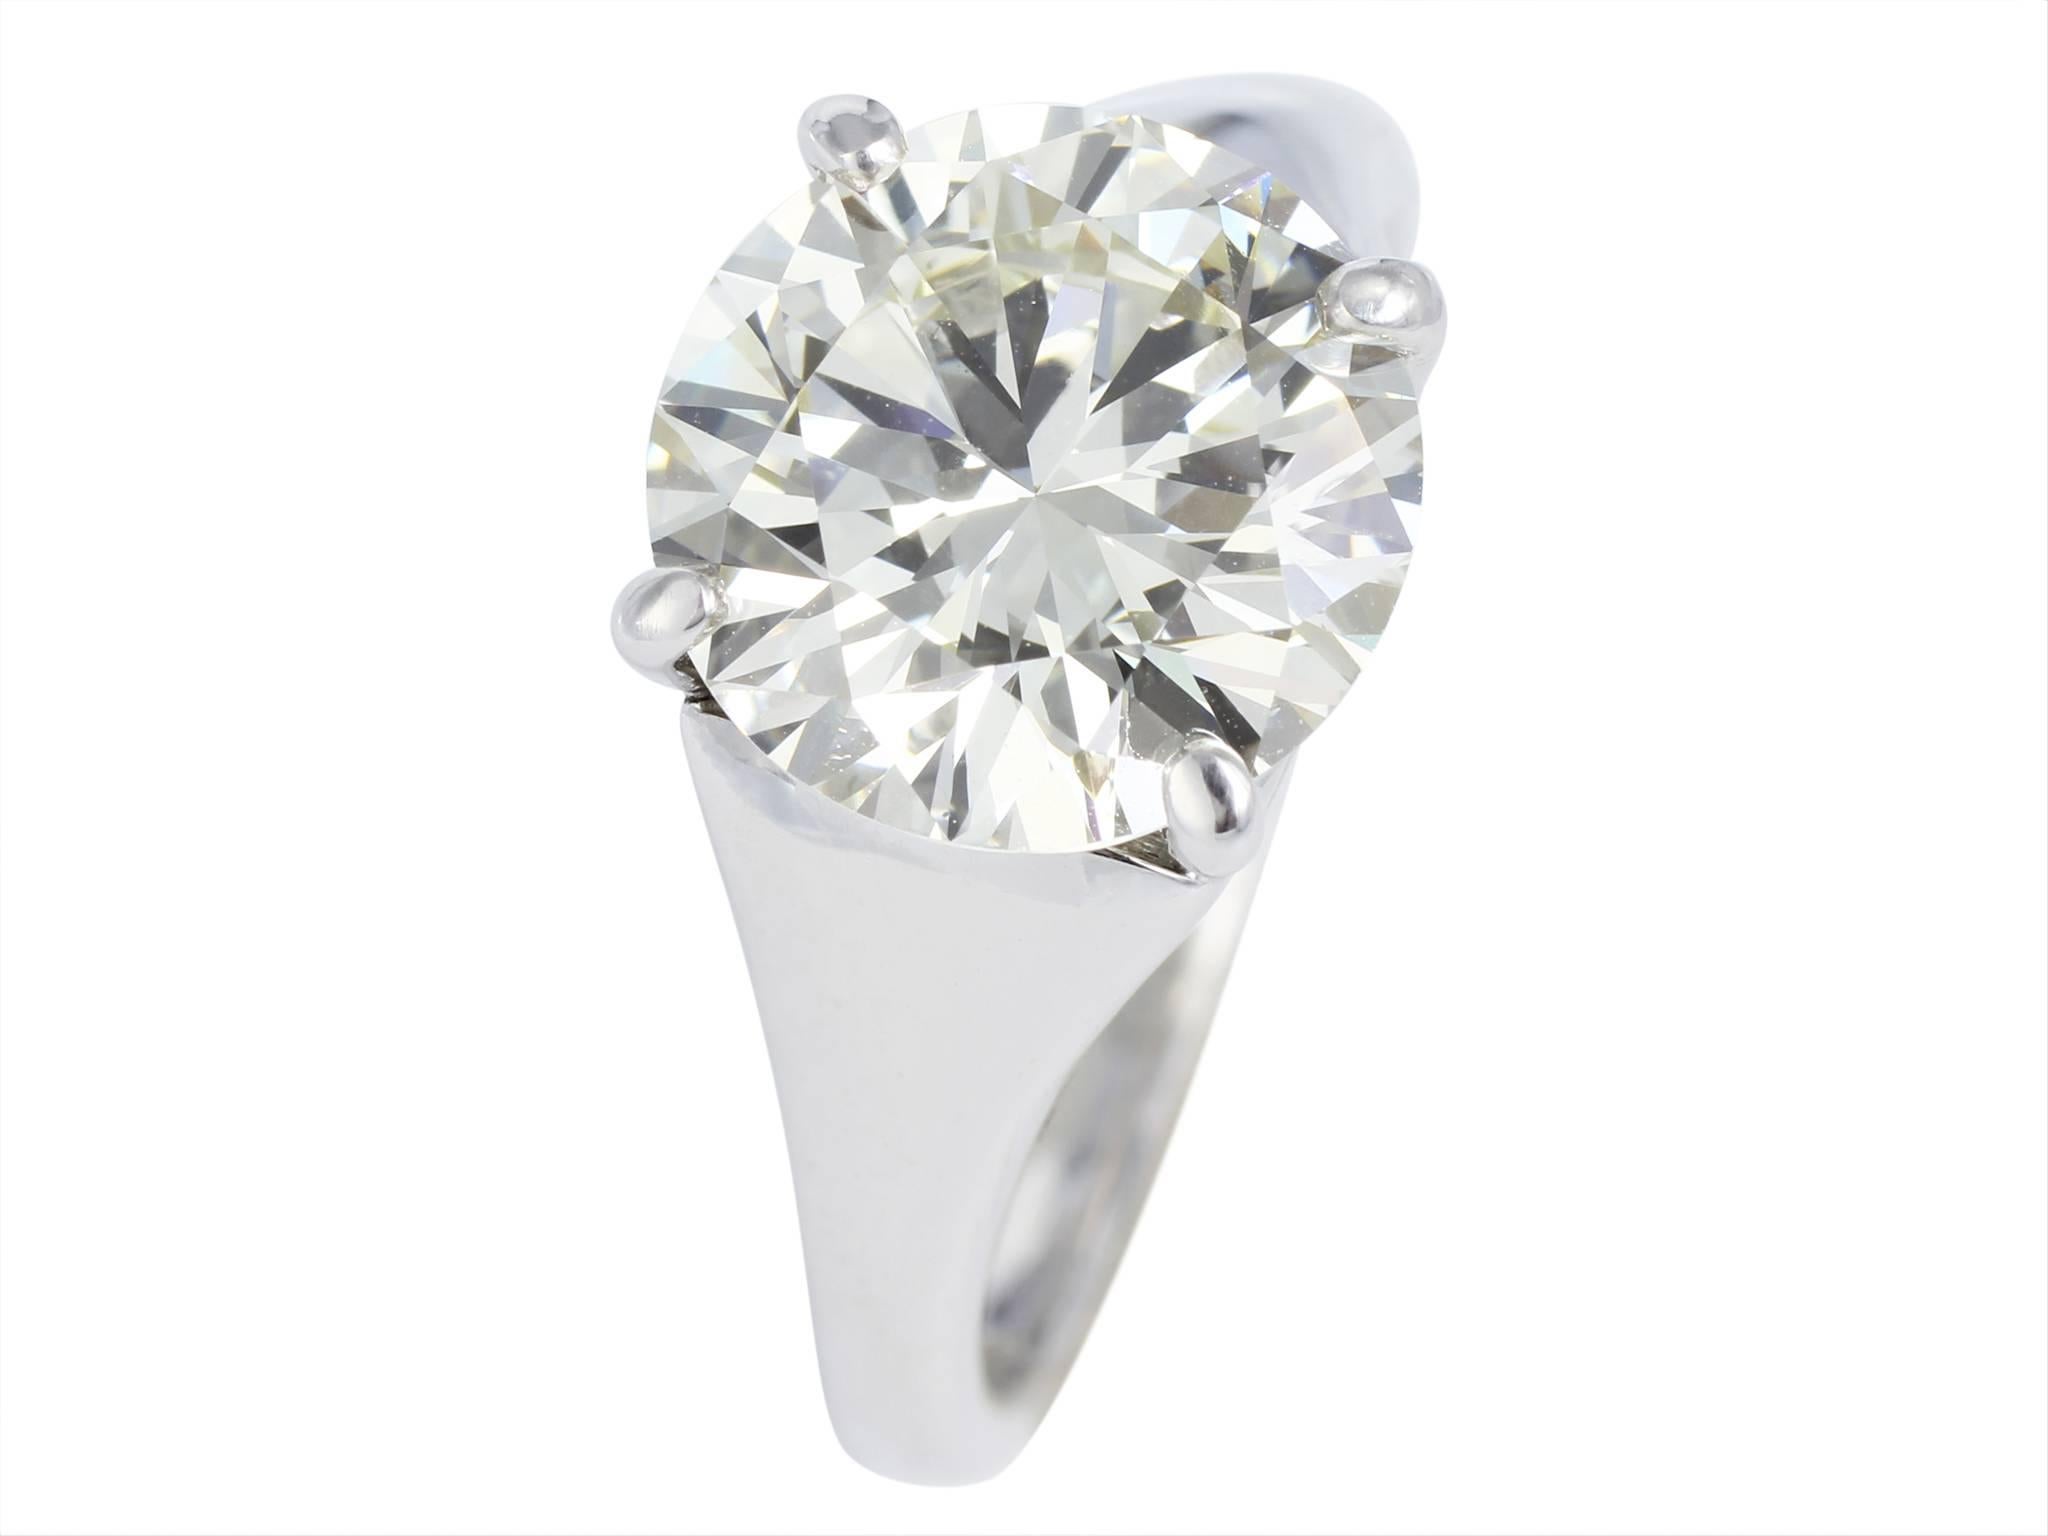 Platinum set 3.77 carat solitaire ring featuring one GIA certified round brilliant cut diamond with a triple excellence rating for excellent polish, excellent symmetry and excellent cut.  The diamond is H color and SI1 clarity, GIA  certificate #